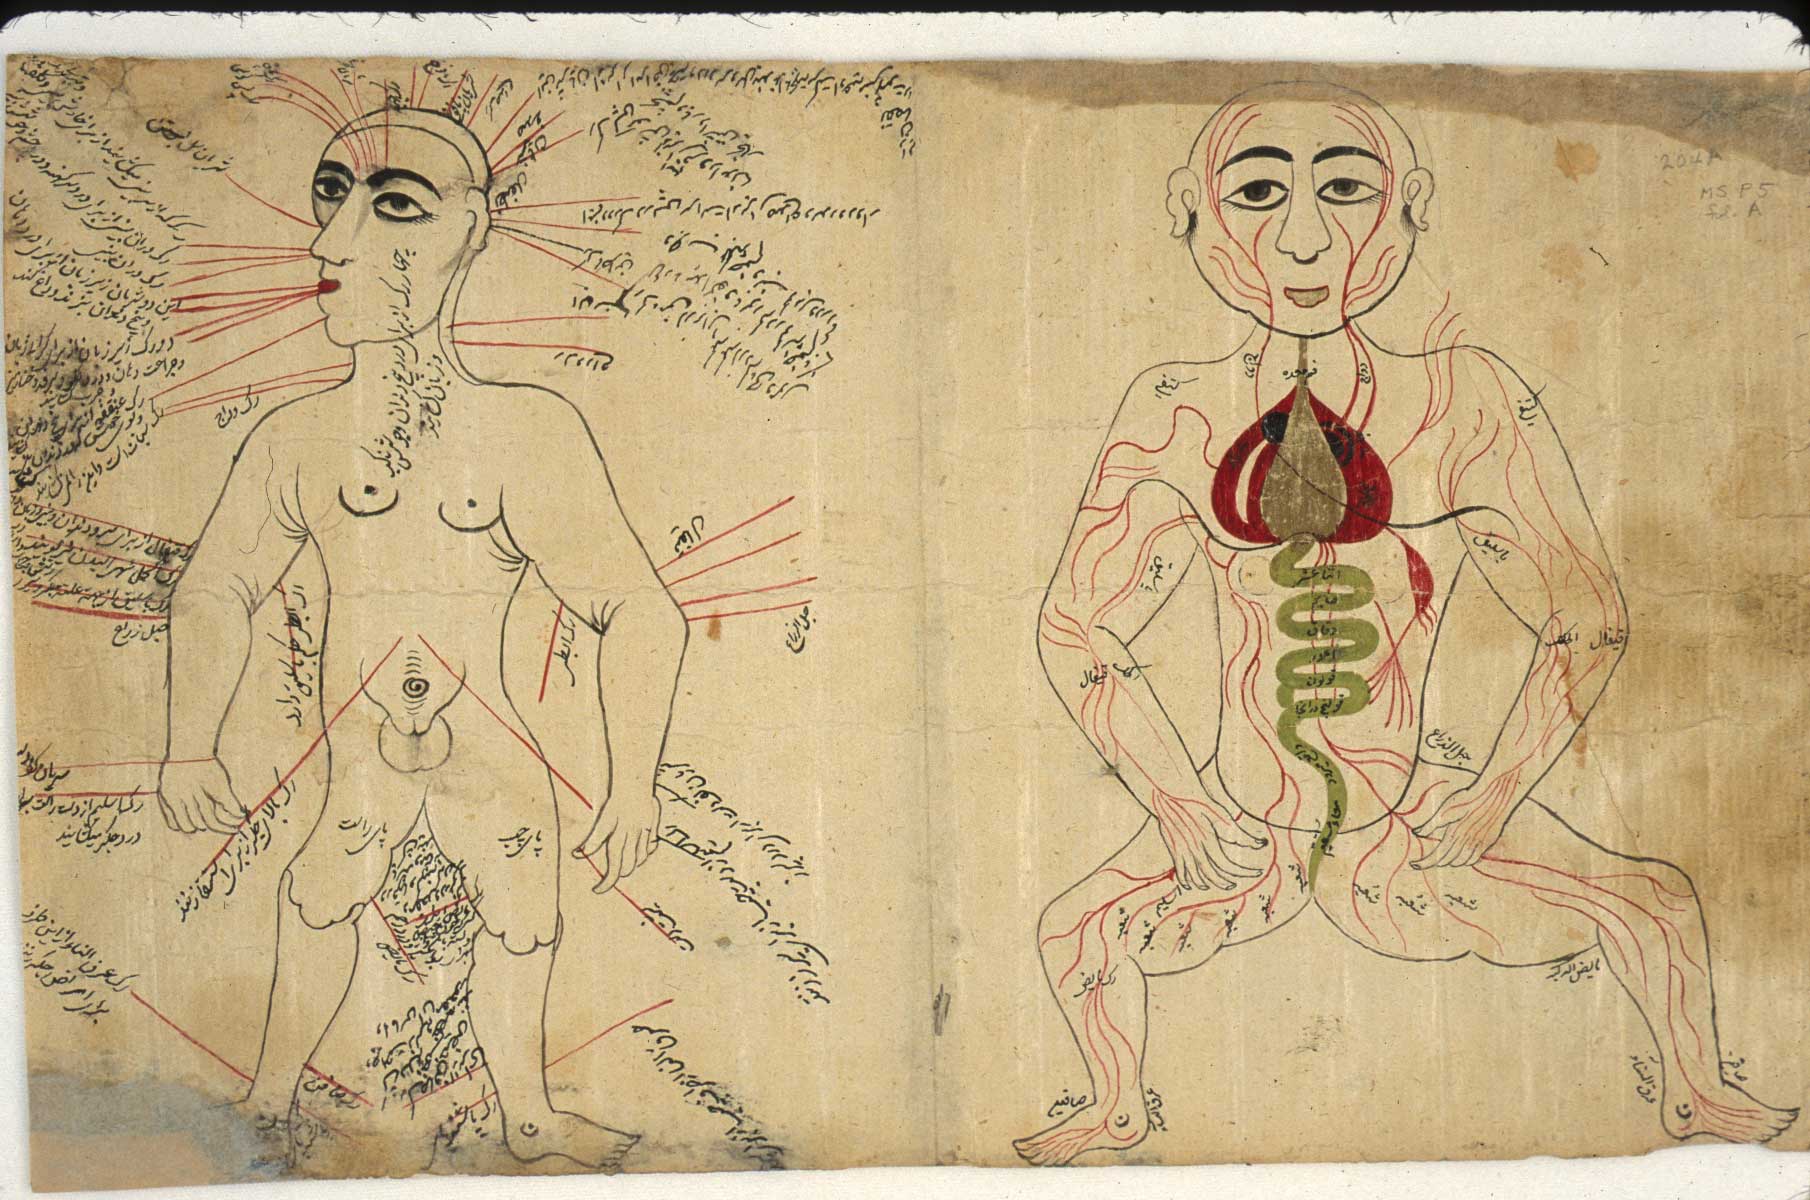 Manuscript leaf with two facing images: Lefthand Side: A loose sheet with a bloodletting figure having points labeled that were thought best for phlebotomy. Such figures are derivative from late-medieval European bloodletting figures. Undated, probably 18th century. Righthand Side: A loose sheet with a figure, drawn frontally, showing the venous system. The figure is closely related to those usually associated with the Tashrīḥ-i Manṣūri treatise on human anatomy by Ibn Ilyās, who worked in Shiraz in Iran at the end of the 14th century. Undated, probably 18th century. From NLM MS P 5.